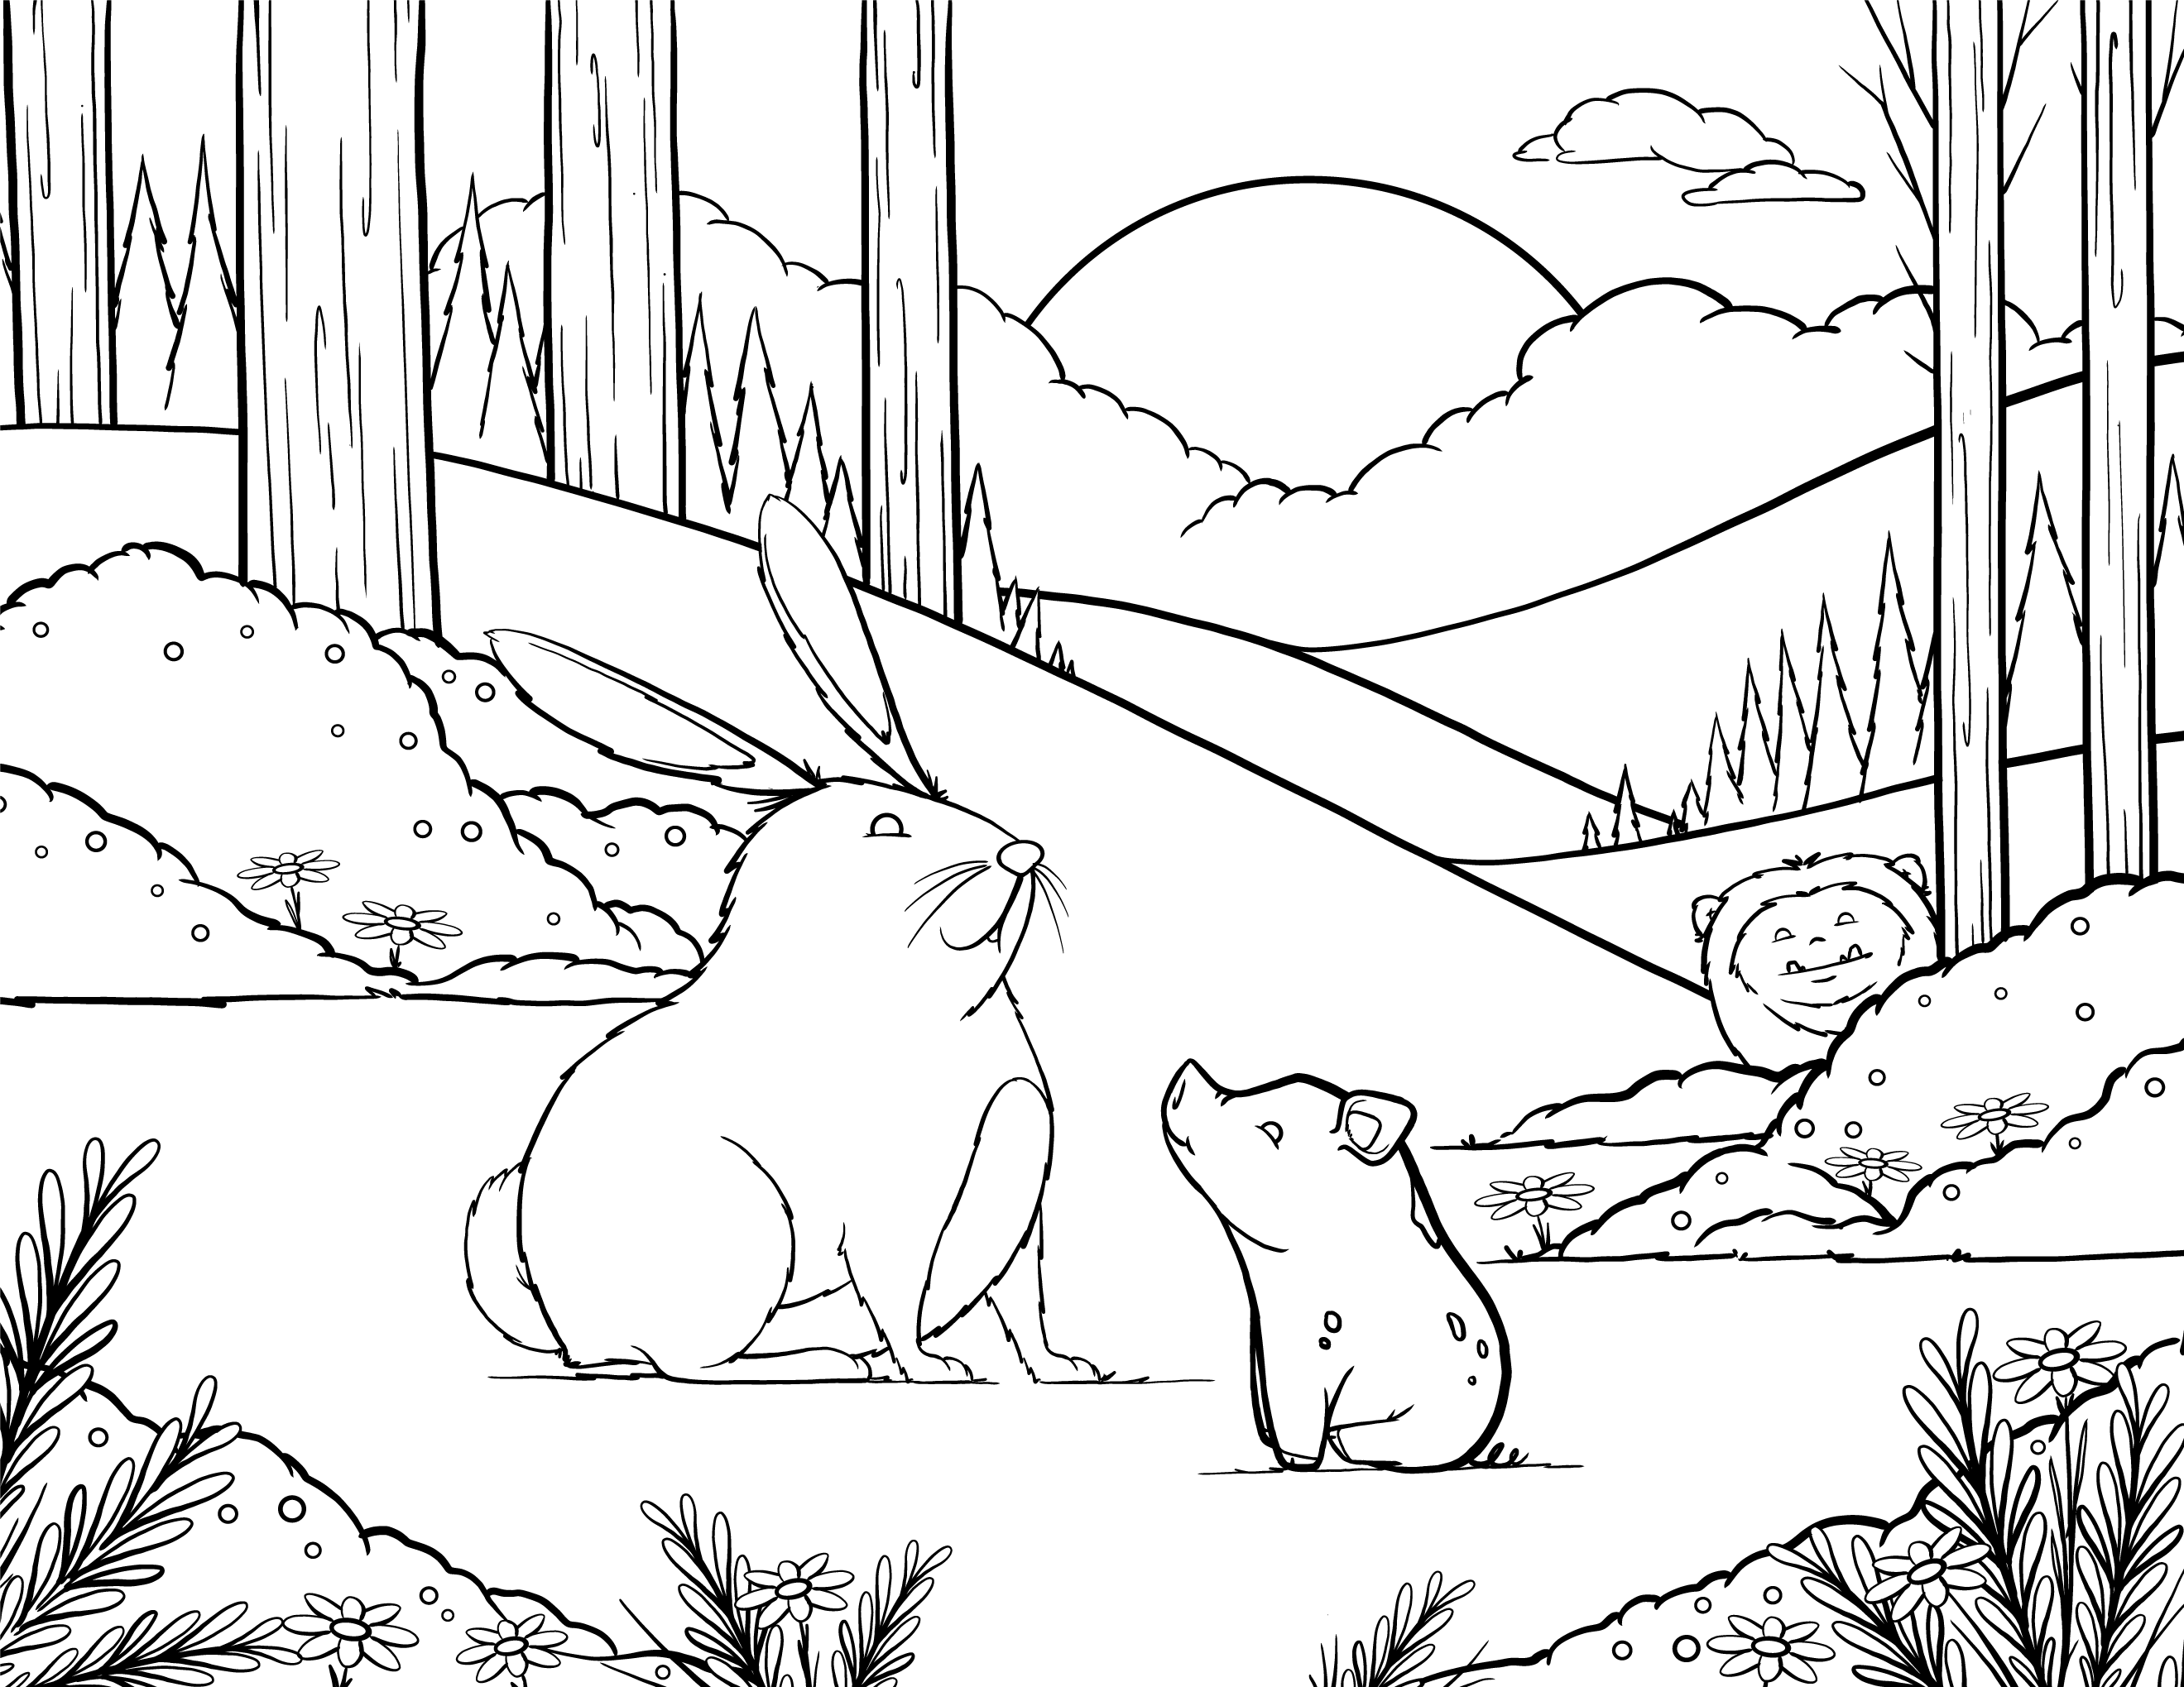 Black & white line art of a forest scene with a rabbit and small pig in the center. A strange furry creature peaks out from the bushes in the background.